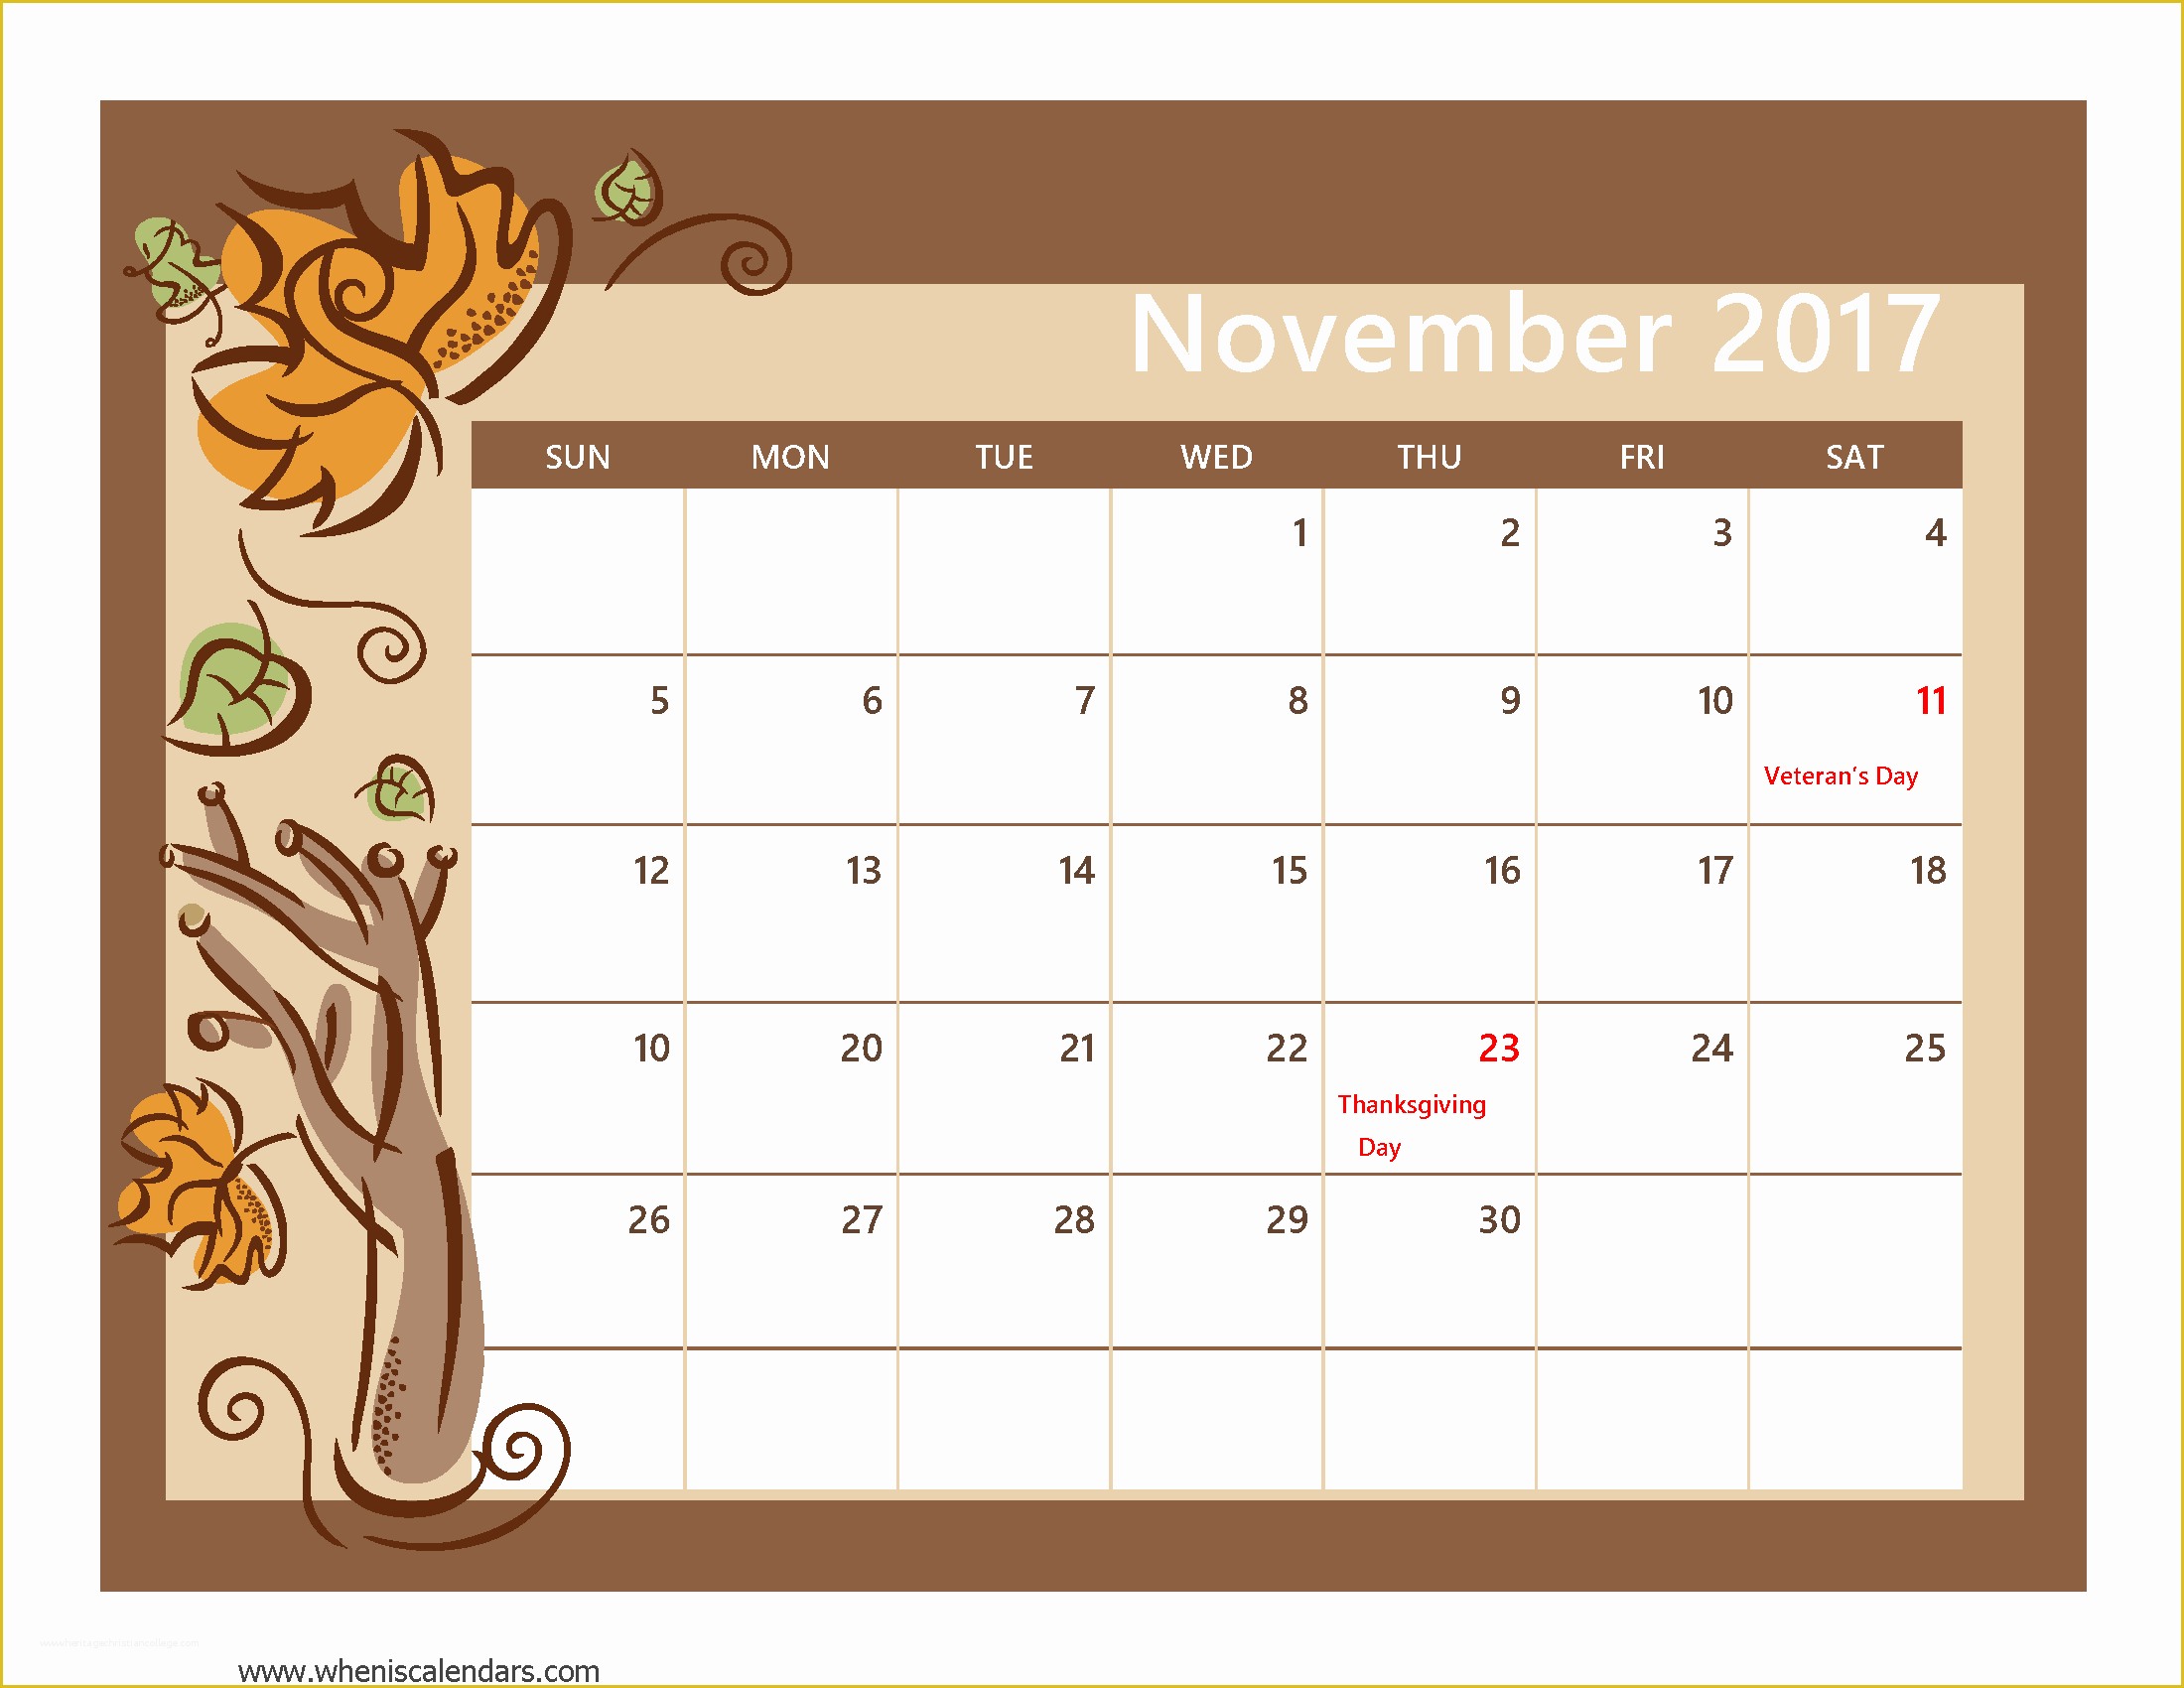 Holiday Schedule Template Free Of November 2017 Calendar with Holidays